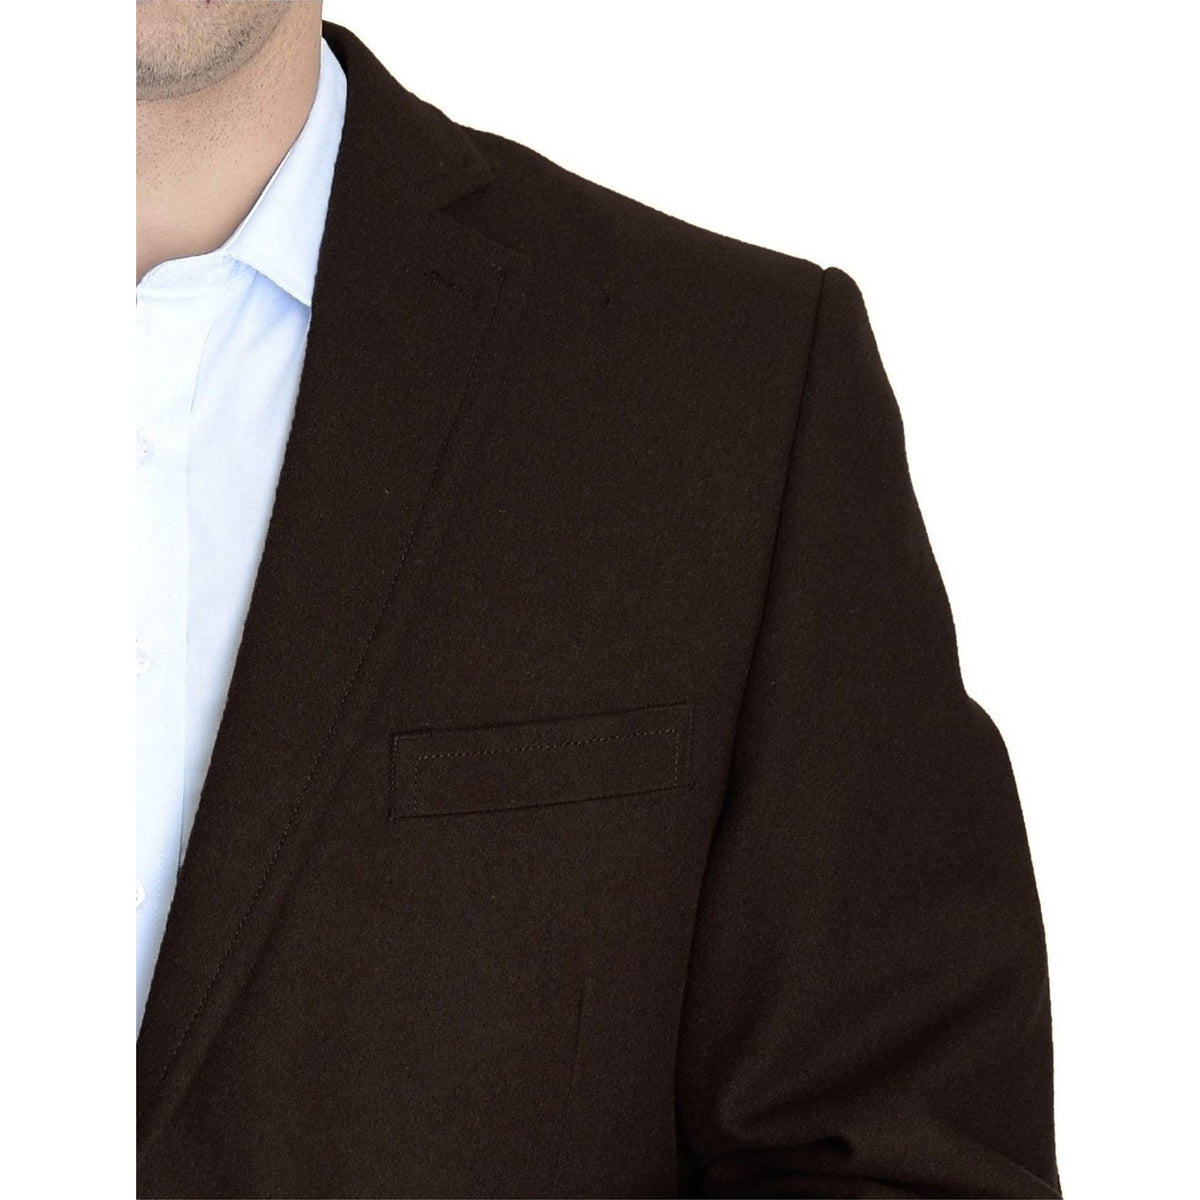 Men&#39;s Wool Cashmere Single Breasted Chocolate Brown 3/4 Length Car Coat Top Coat